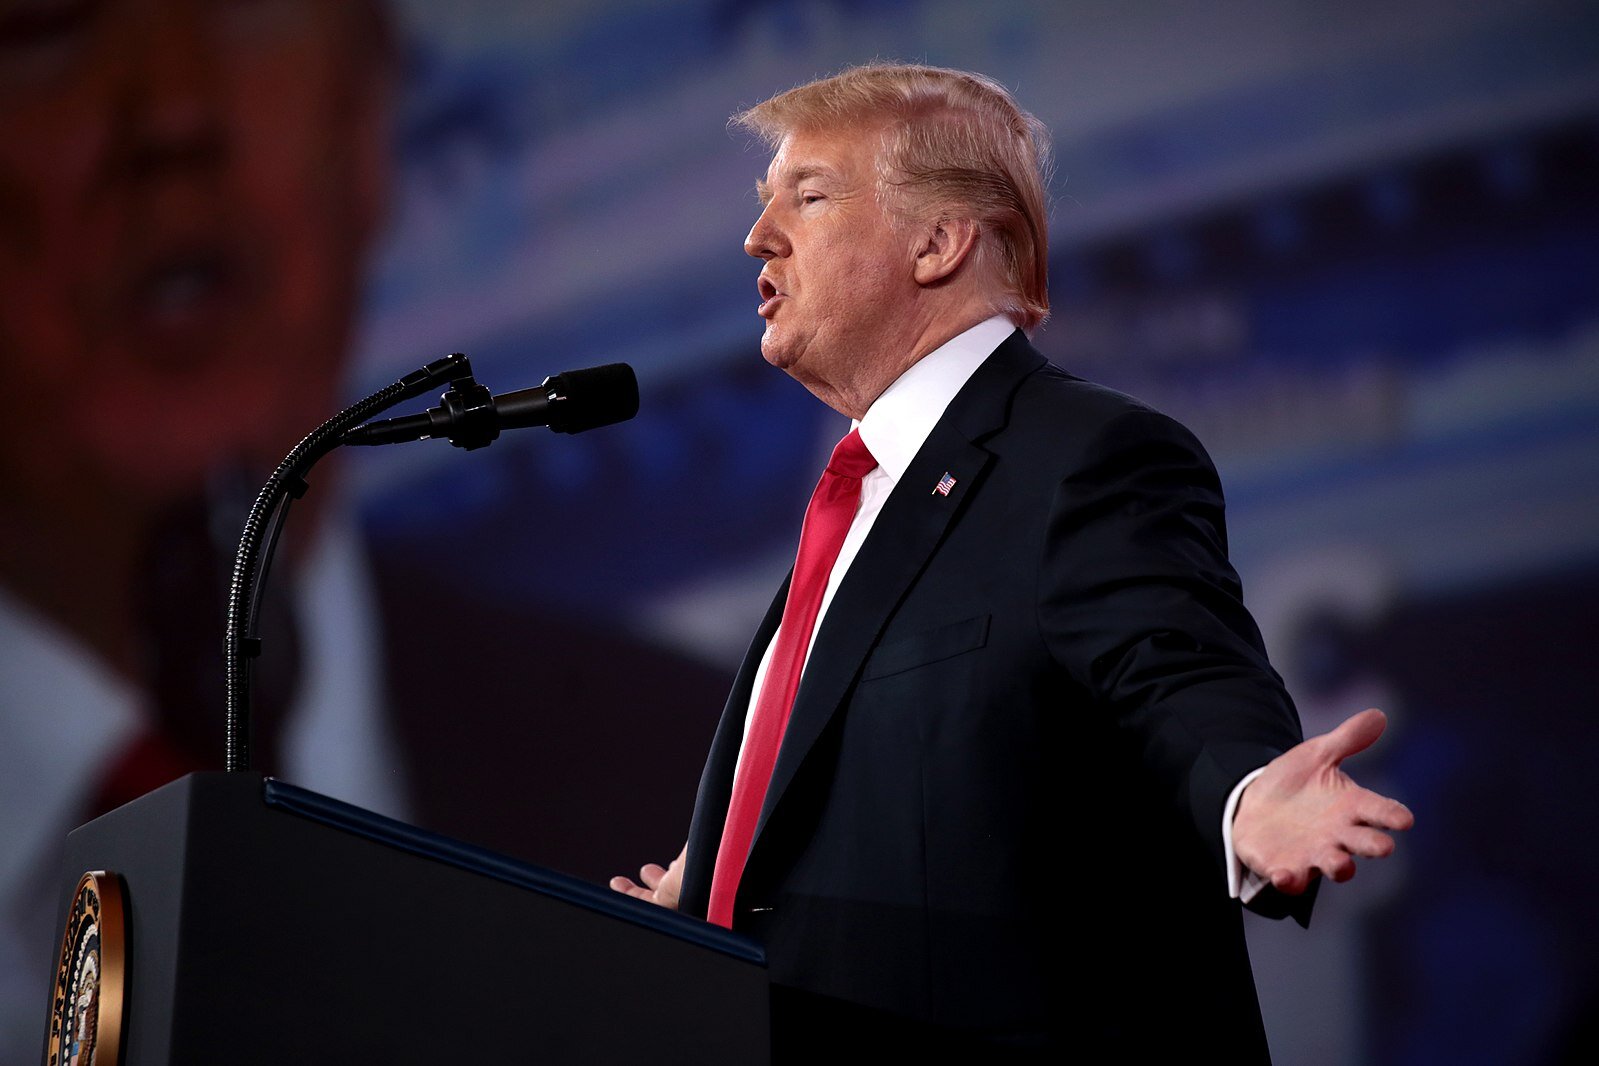 February 23, 2018 - President of the United States Donald Trump speaking at the 2018 Conservative Political Action Conference (CPAC) in National Harbor, Maryland. (Photo by Gage Skidmore | Wikimedia Commons)